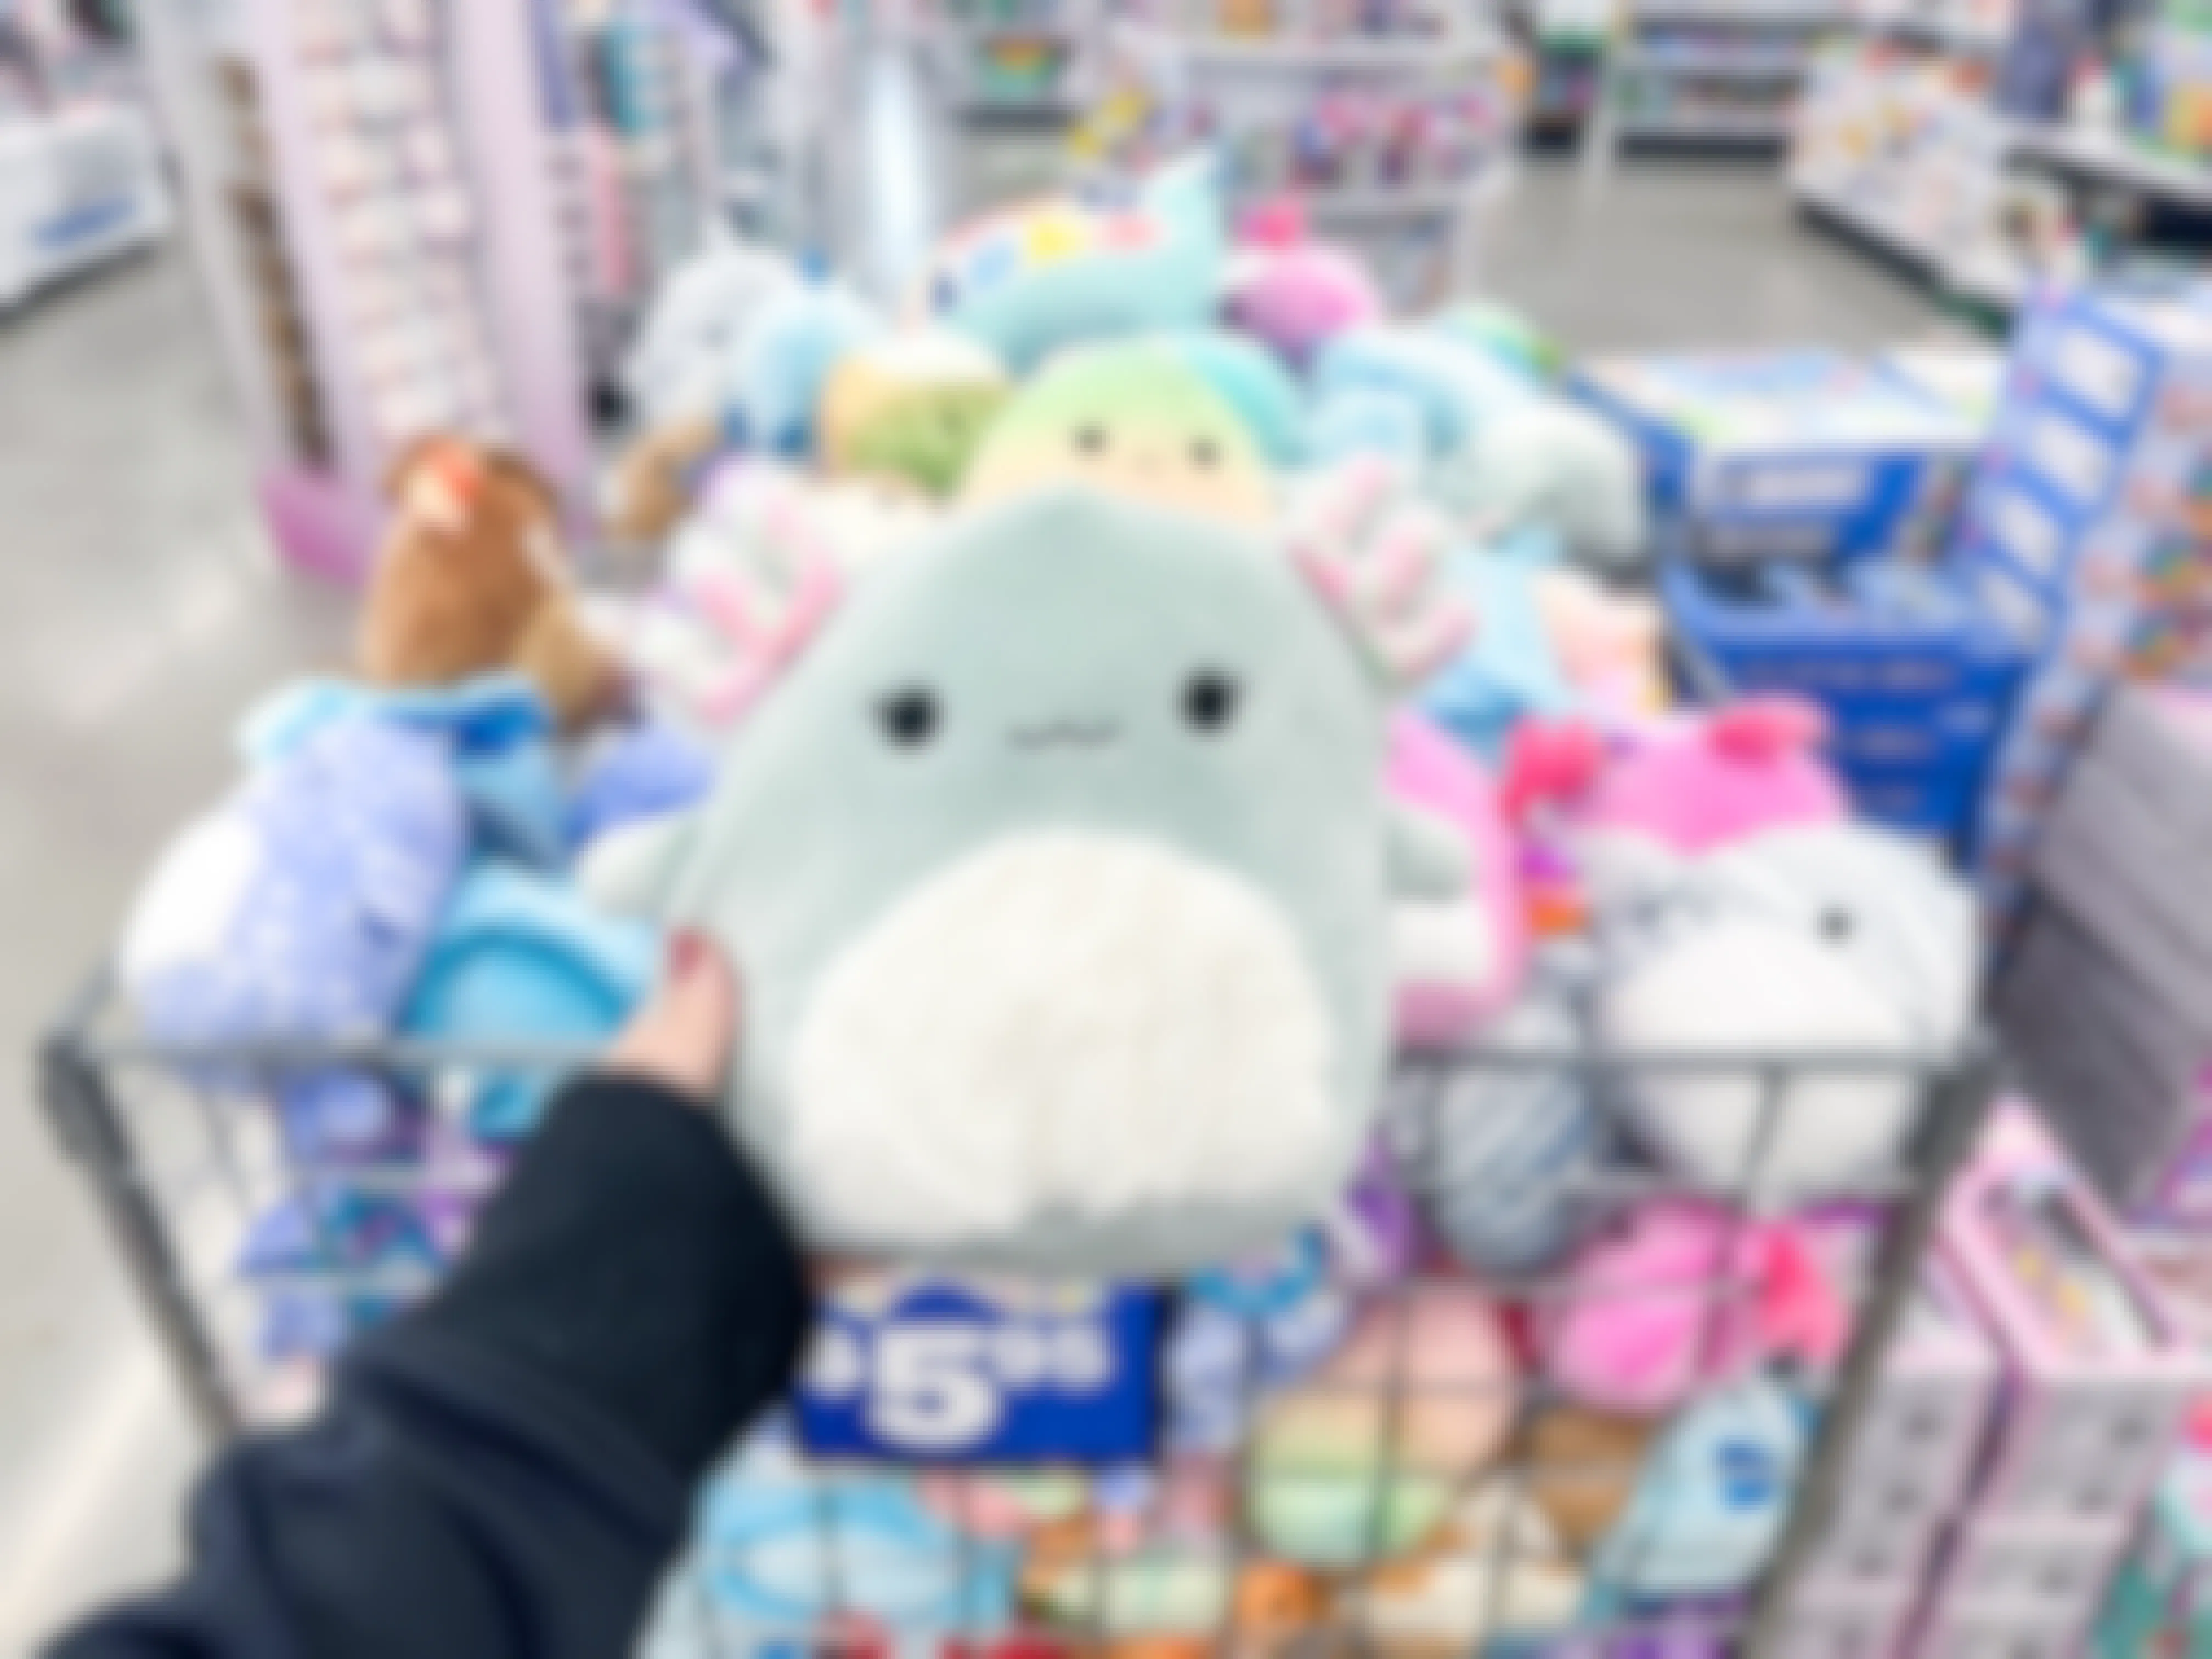 Chasmen the Axolotl in front of a large bin of Squishmallows at Five Below